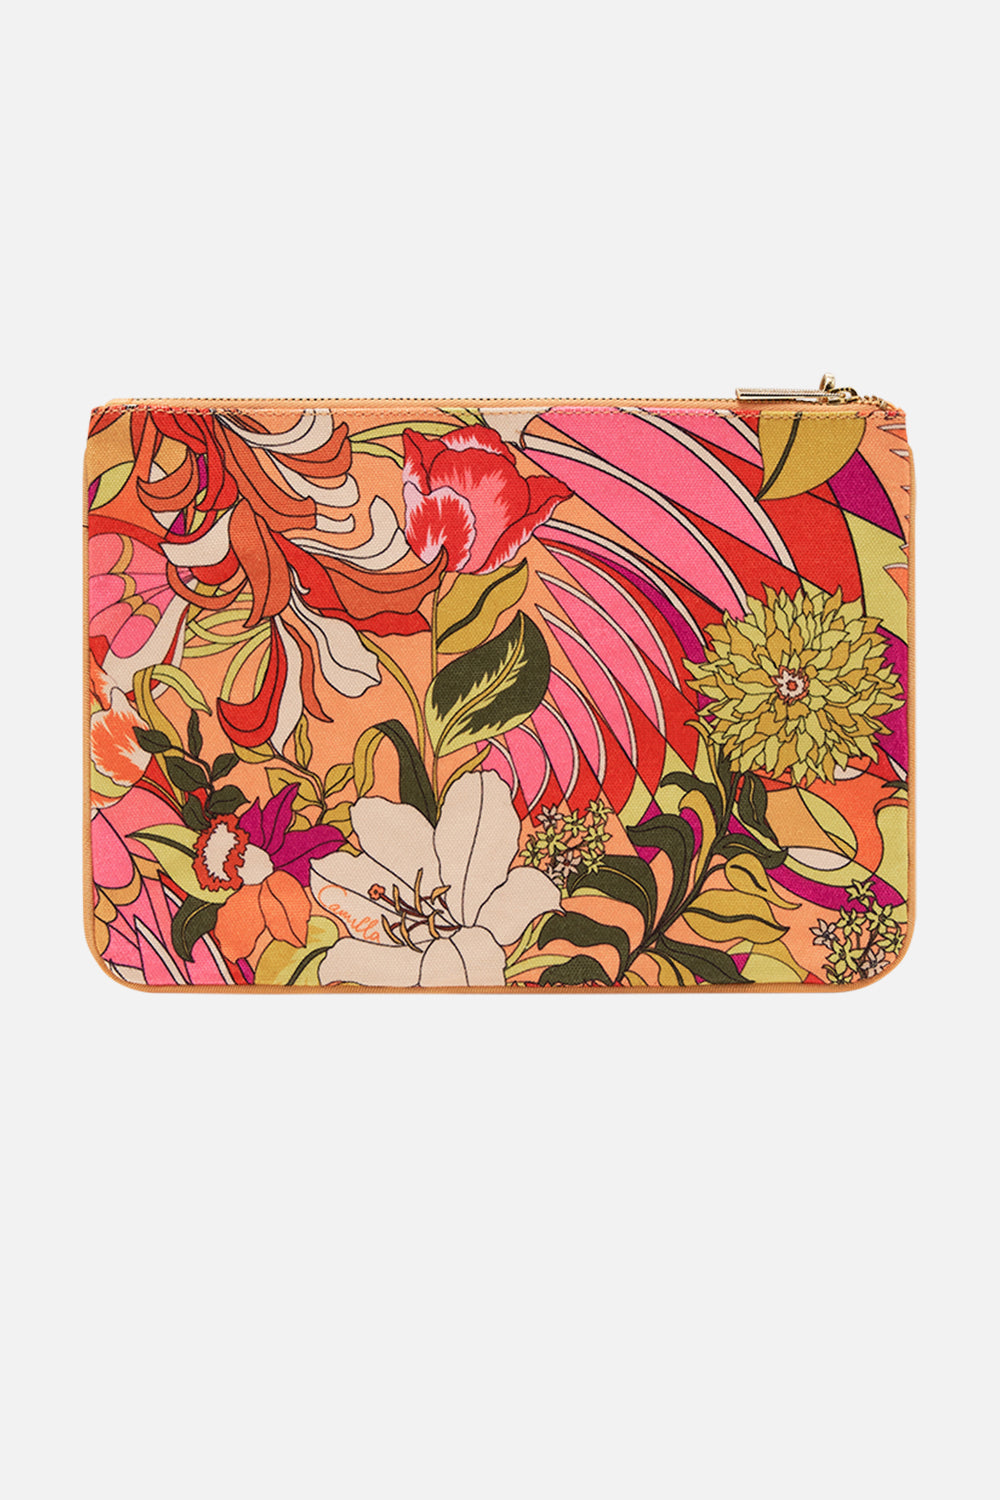 CAMILLA Floral Small Canvas Clutch in The Flower Child Society print